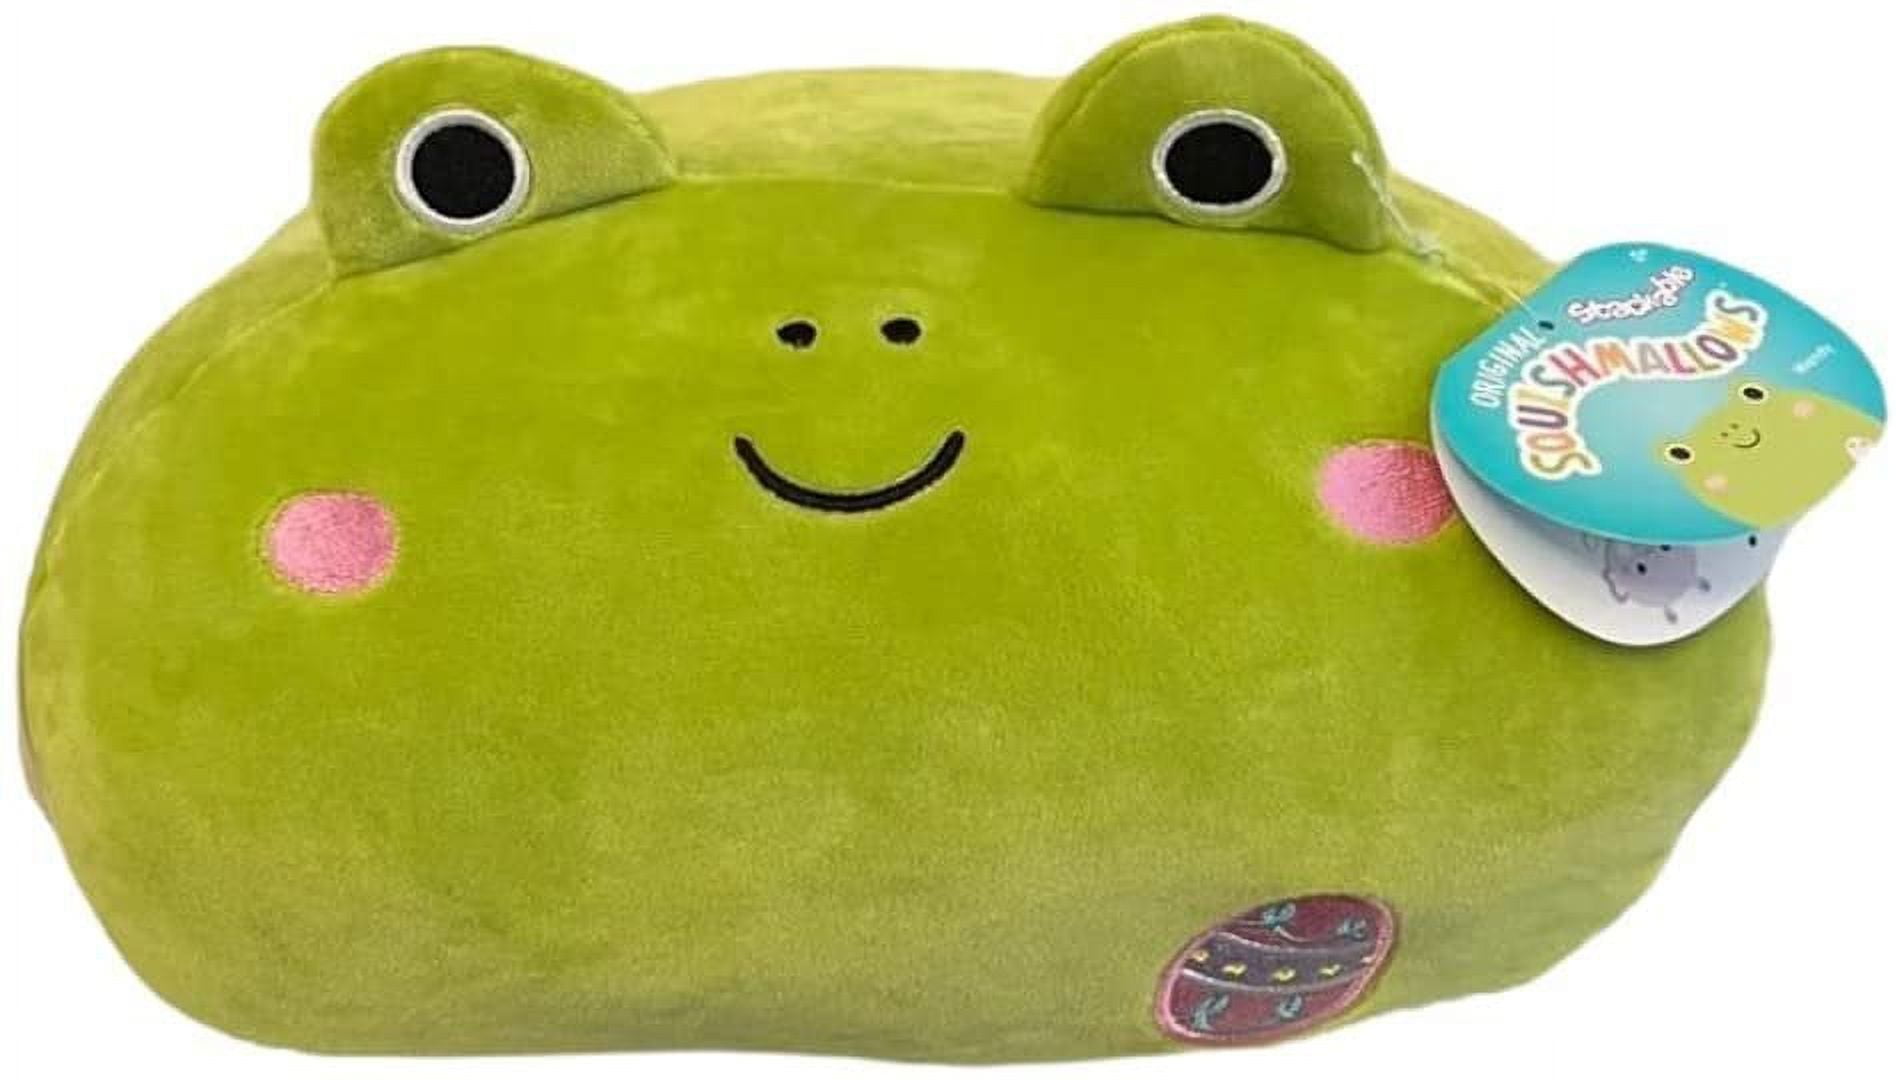 Squishmallows 8 Doxl The Rainbow Frog- Official Kellytoy Plush